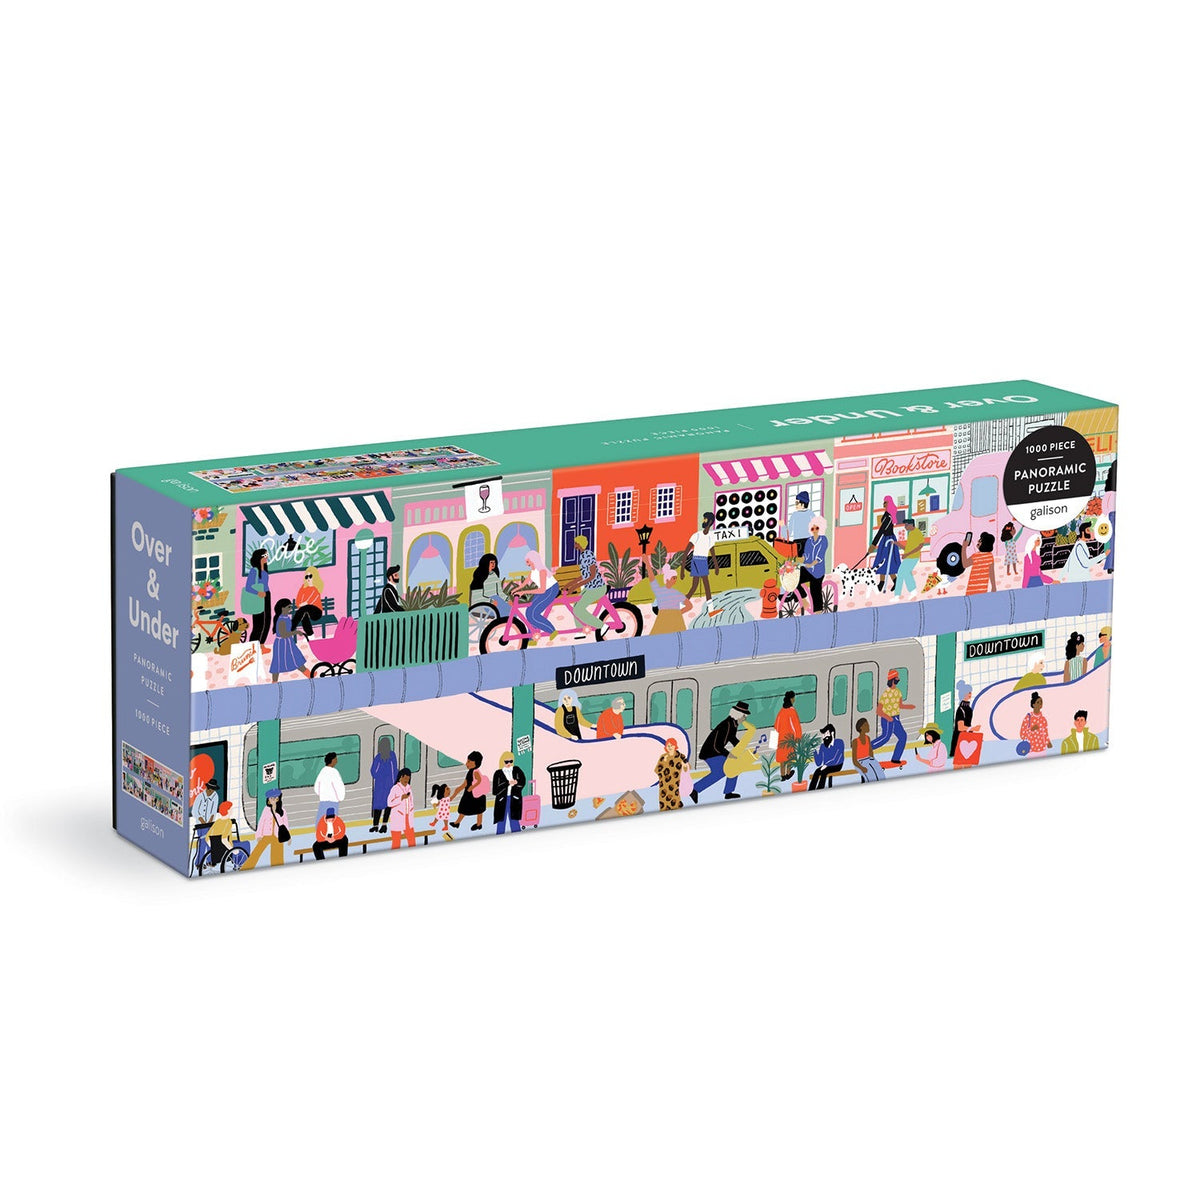 Over &amp; Under 1000 Piece Panoramic Jigsaw Puzzle